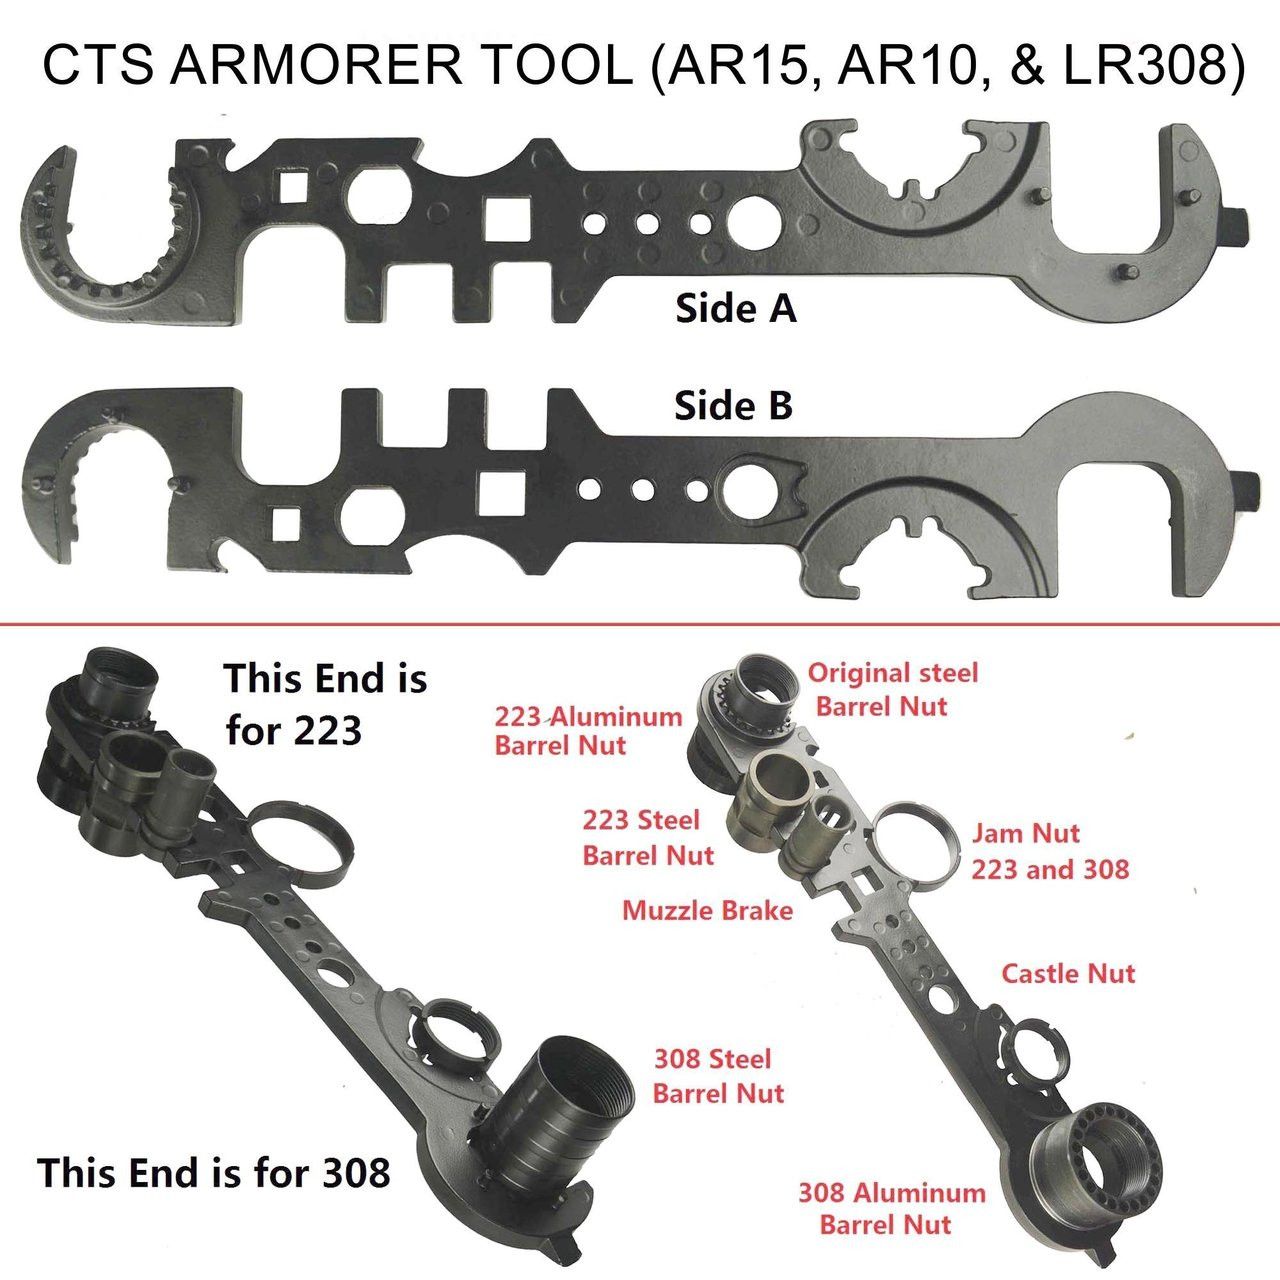 BLACK LABEL | Armorers Wrench Multi Tool for AR-15, AR-10, & LR-308 (TC-09181300) 